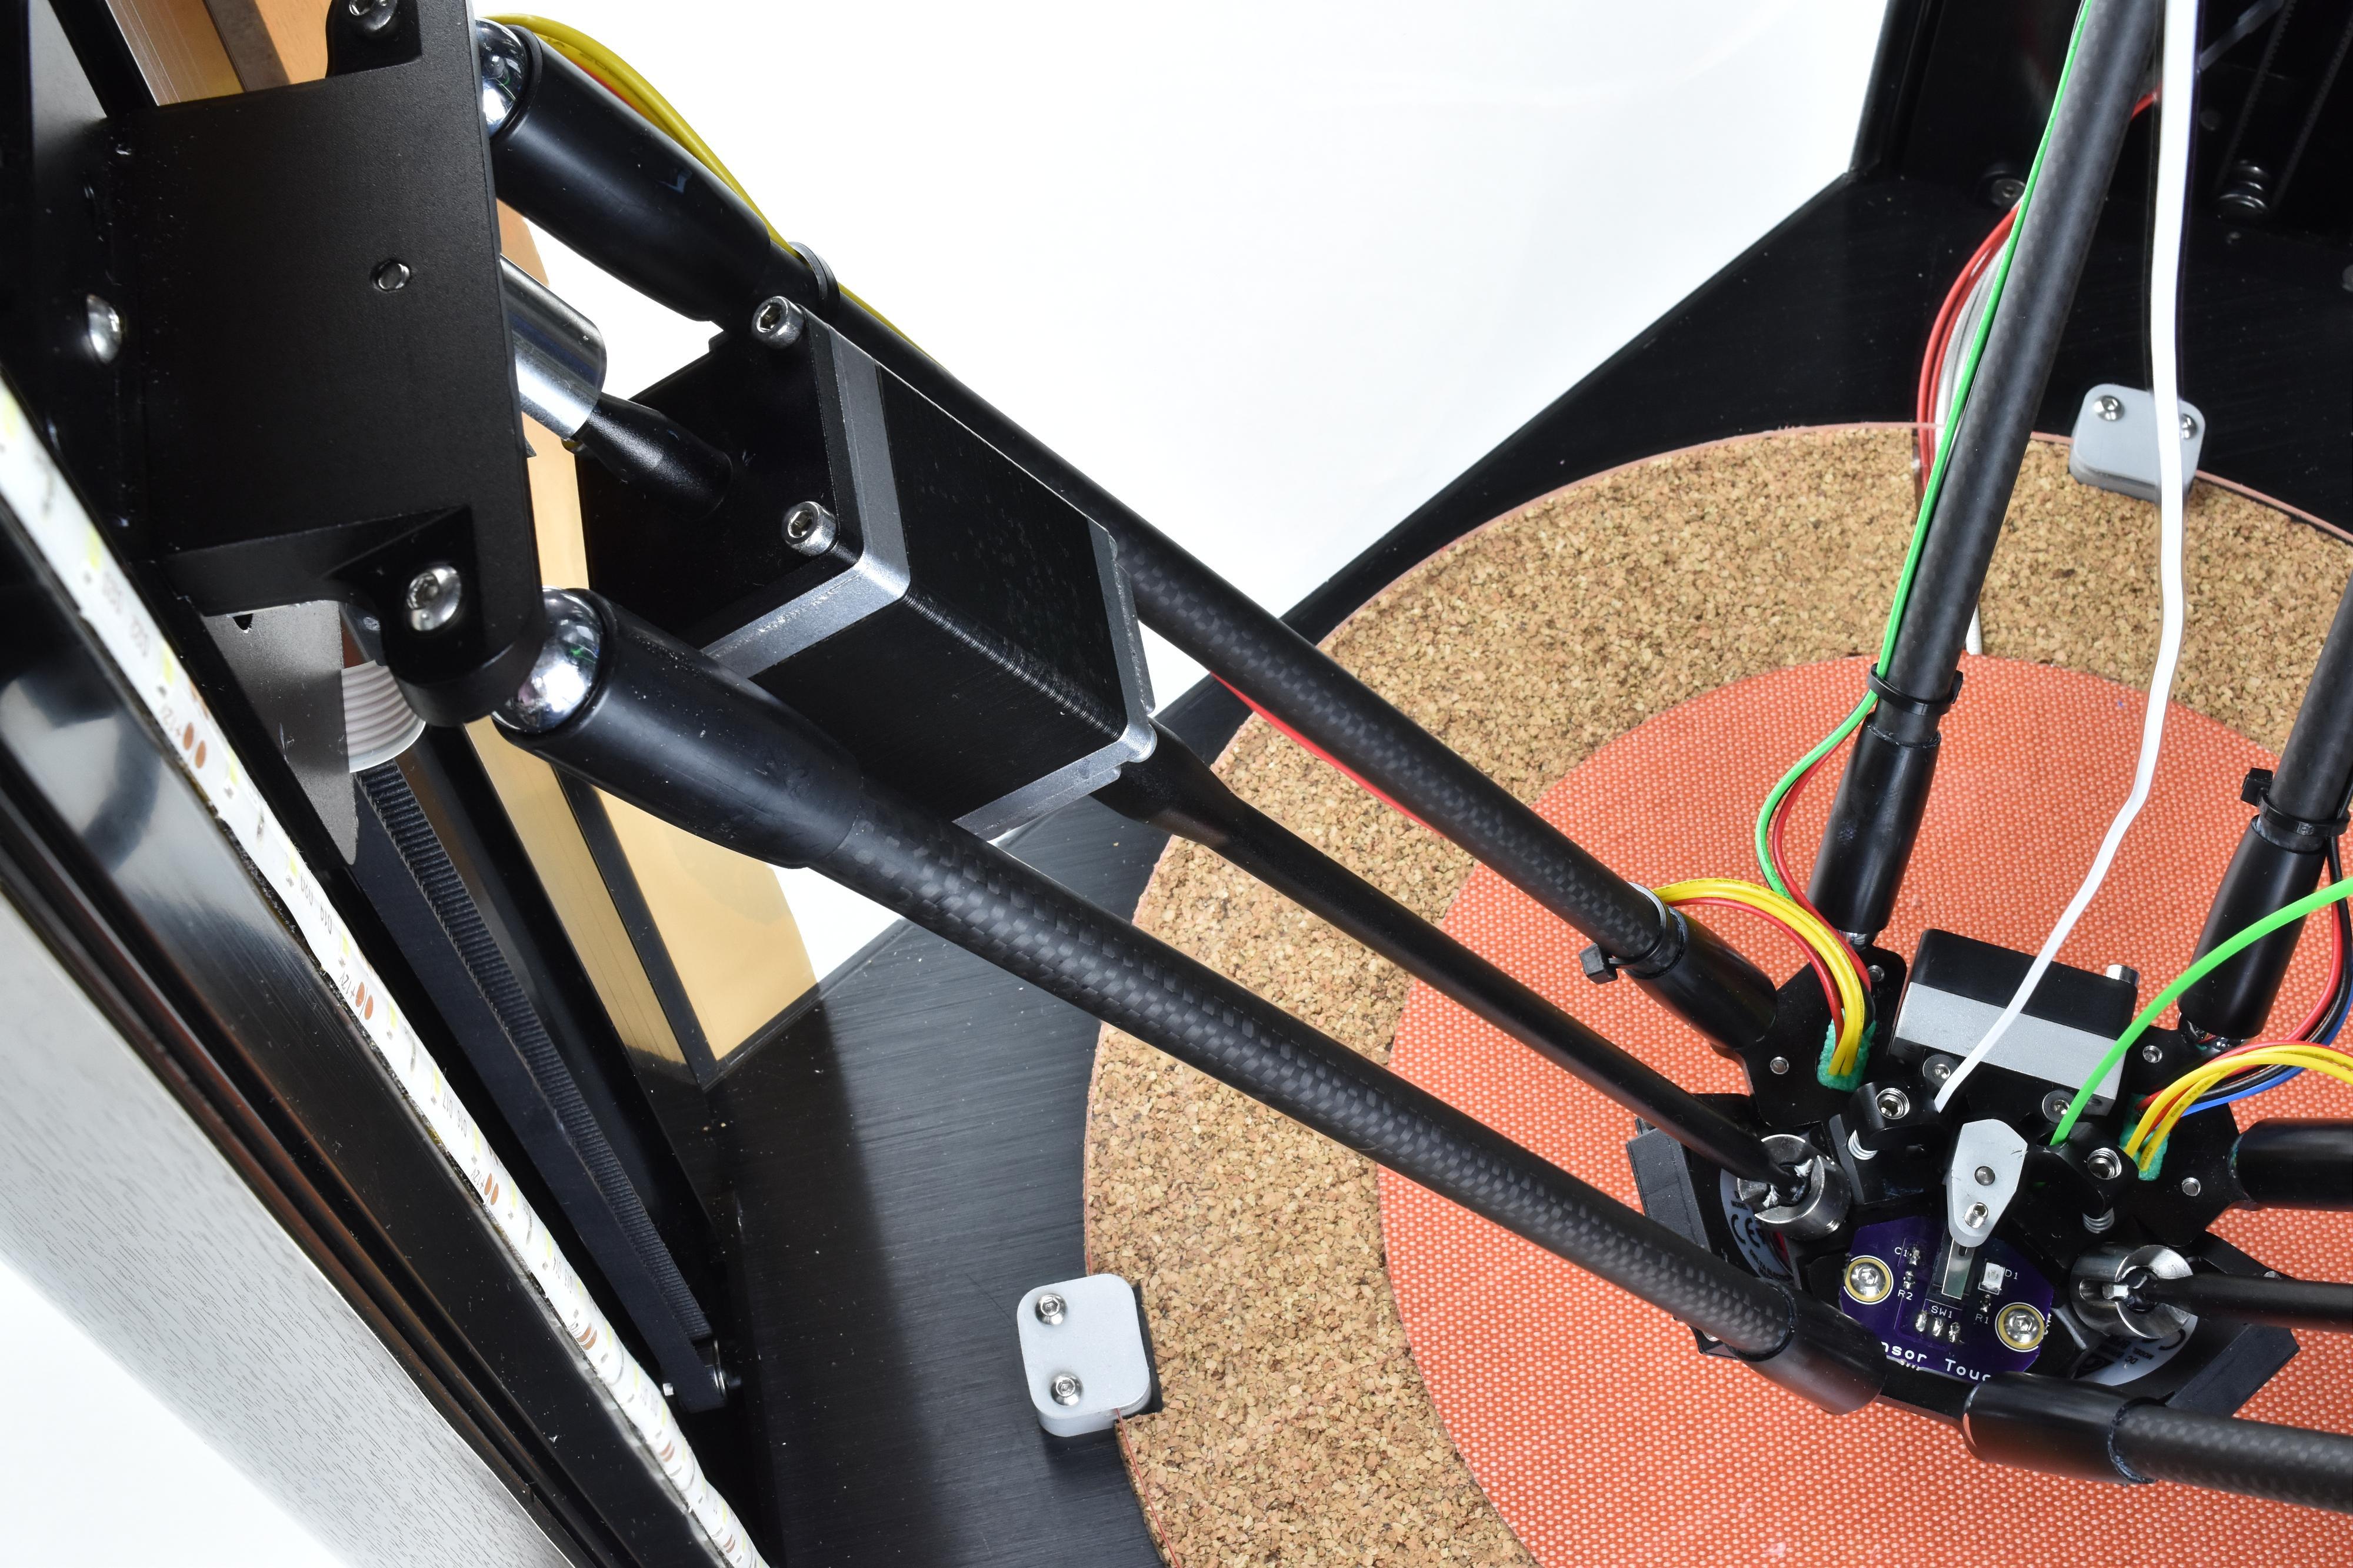 Griffin 3D Launches Large Delta 3D Printer and Two Smaller Printers Via ... - Direct ExtruDer